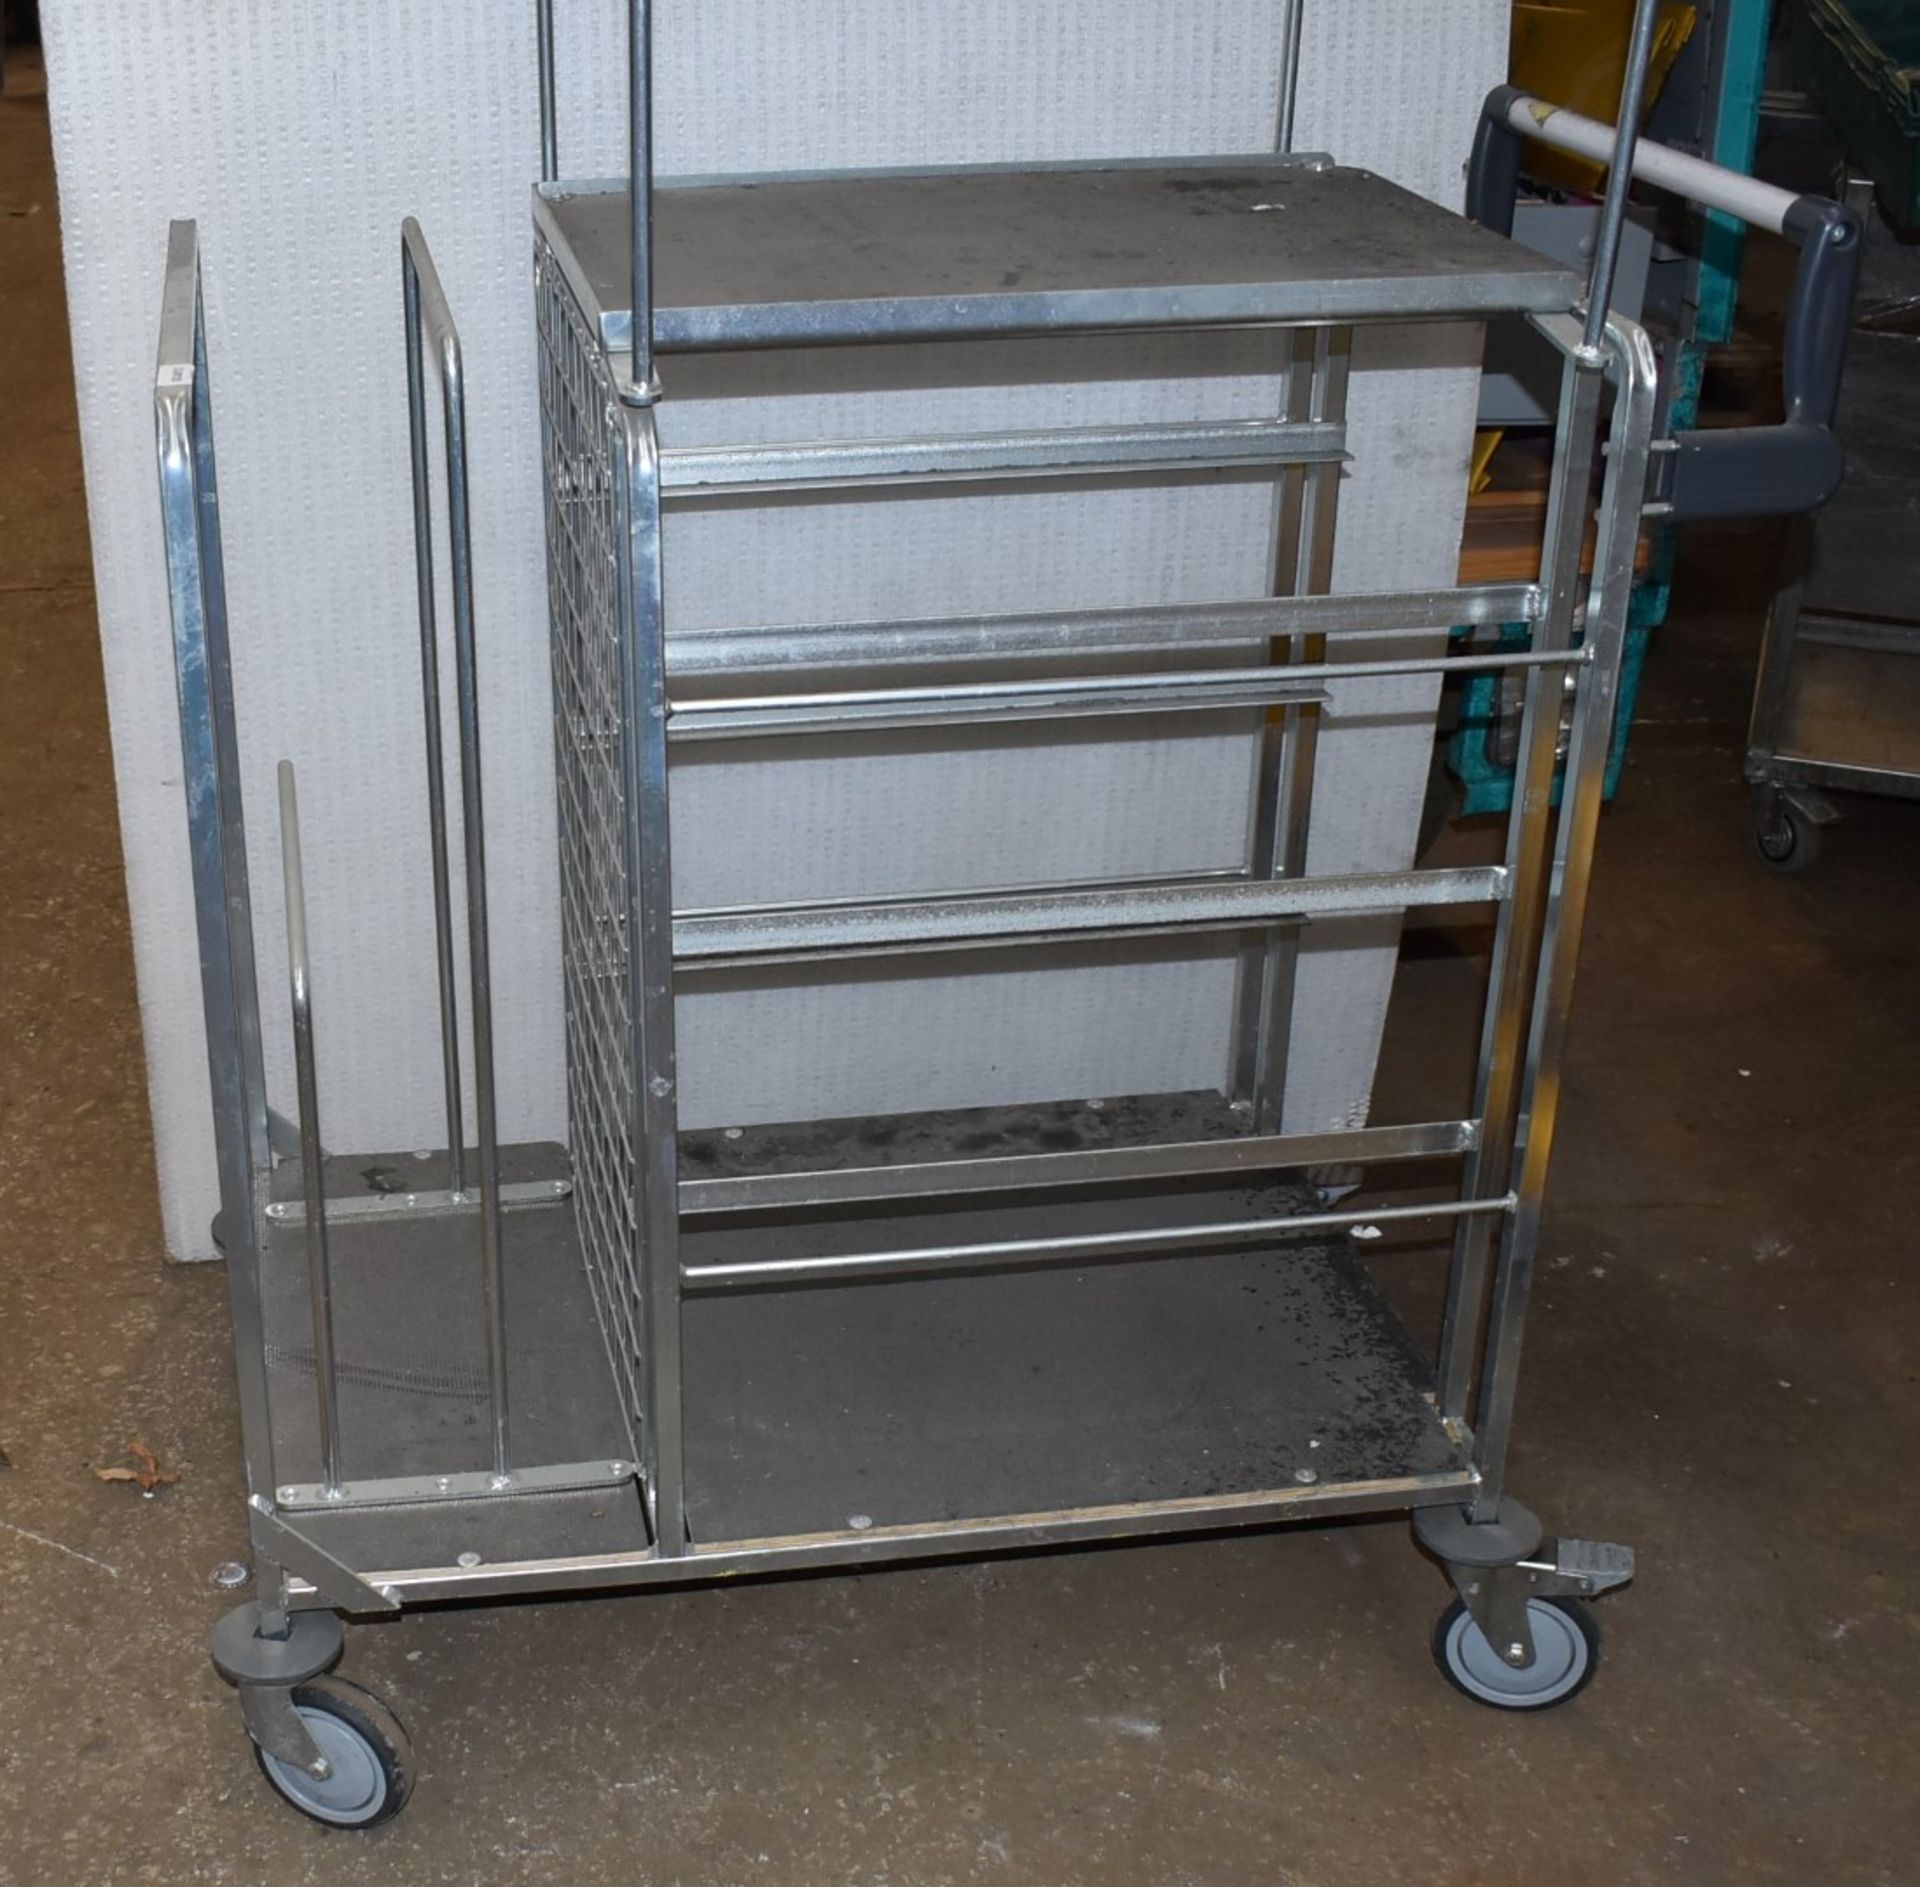 1 x Mobile Picker / Packer Trolly - Overall Size H105 x W100 x D60 cms - CL011 - Ref GC512 WH5 - - Image 3 of 5